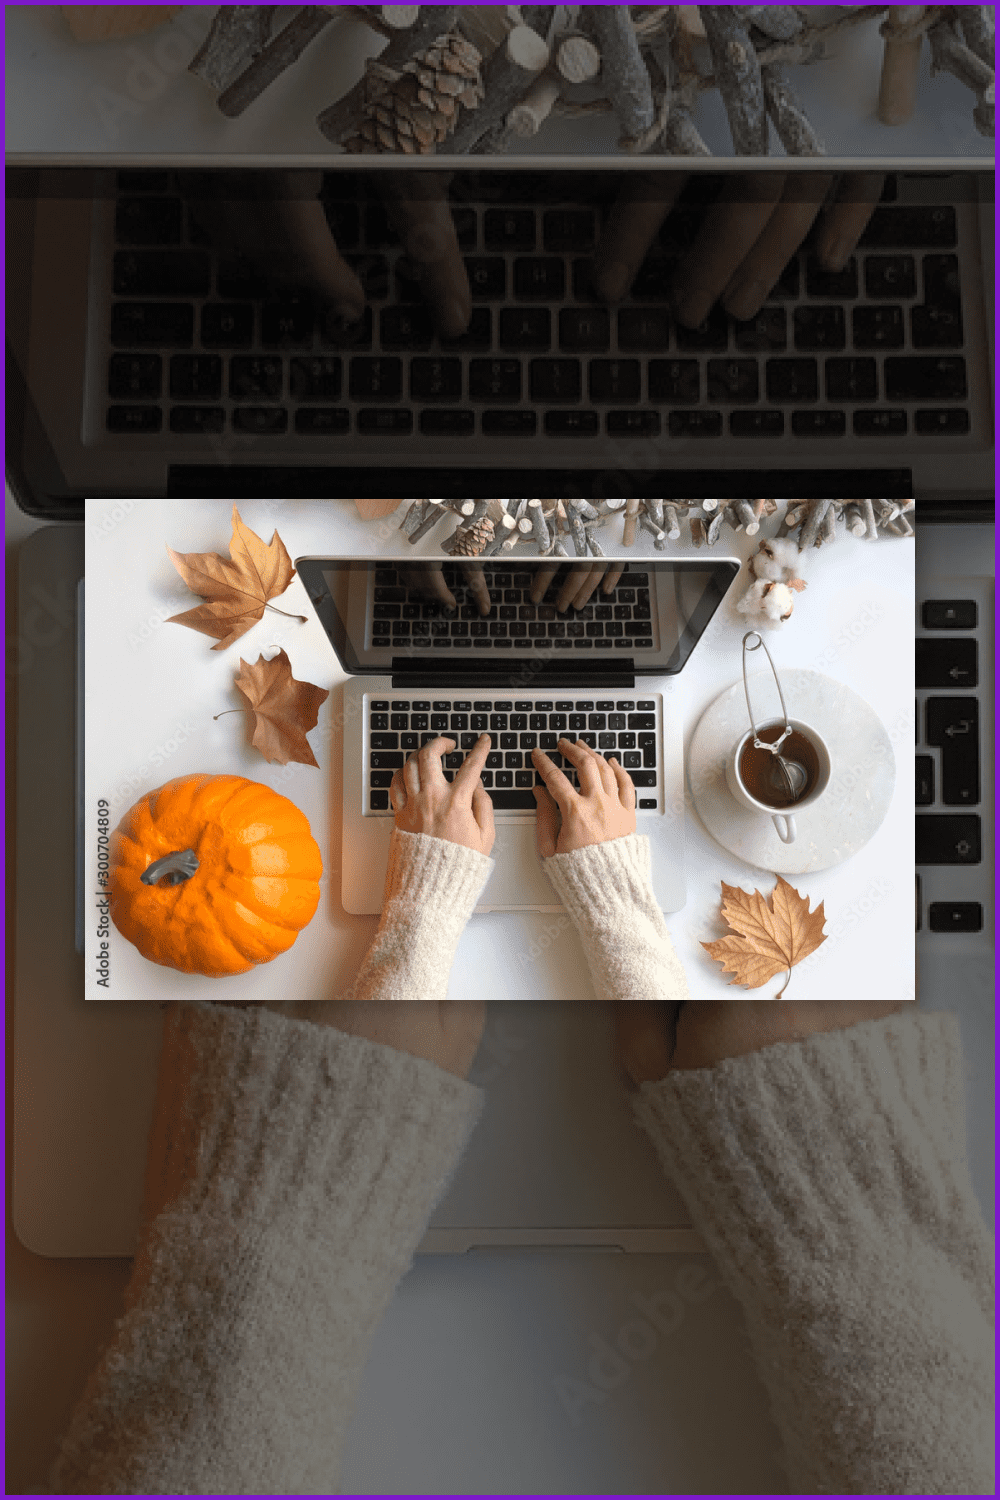 A woman is typing on a laptop surrounded by maple leaves, a pumpkin, a teacup, and a tree branch decor.